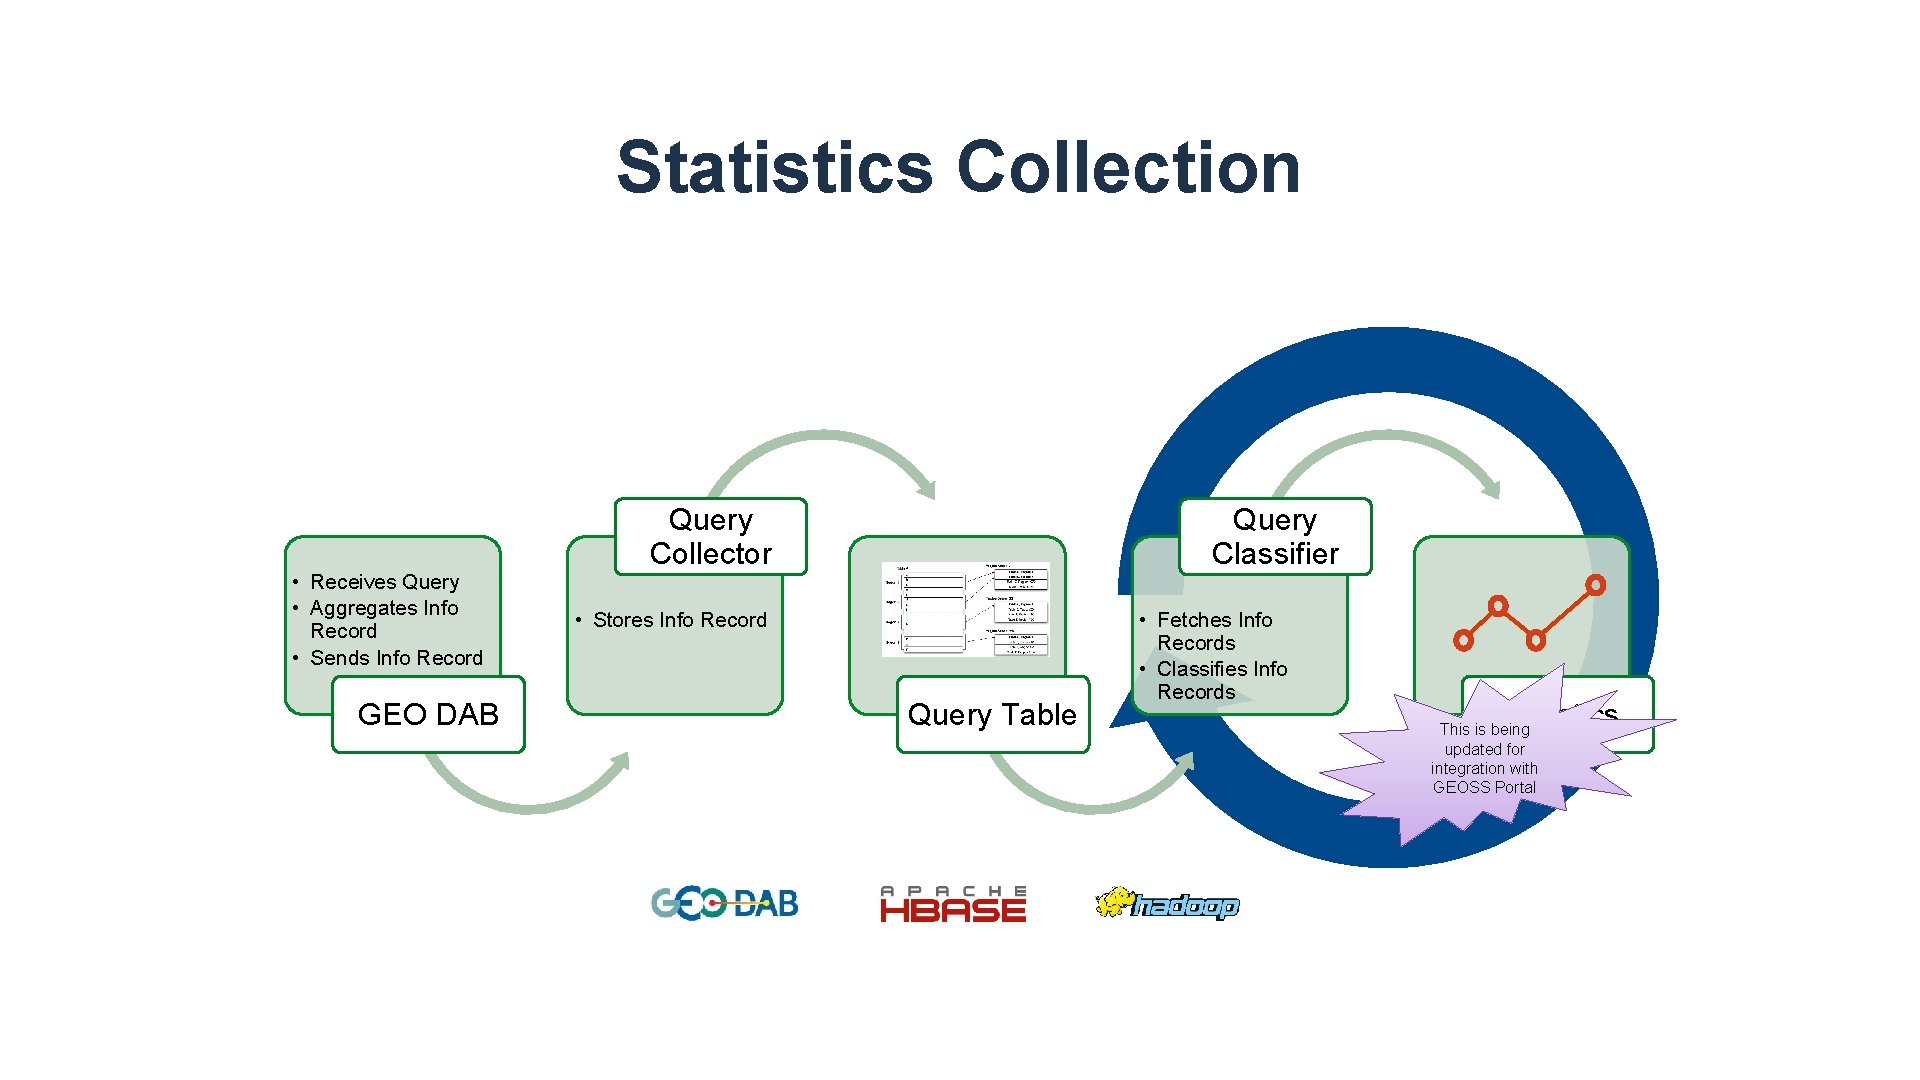 Statistics Collection • Receives Query • Aggregates Info Record • Sends Info Record GEO